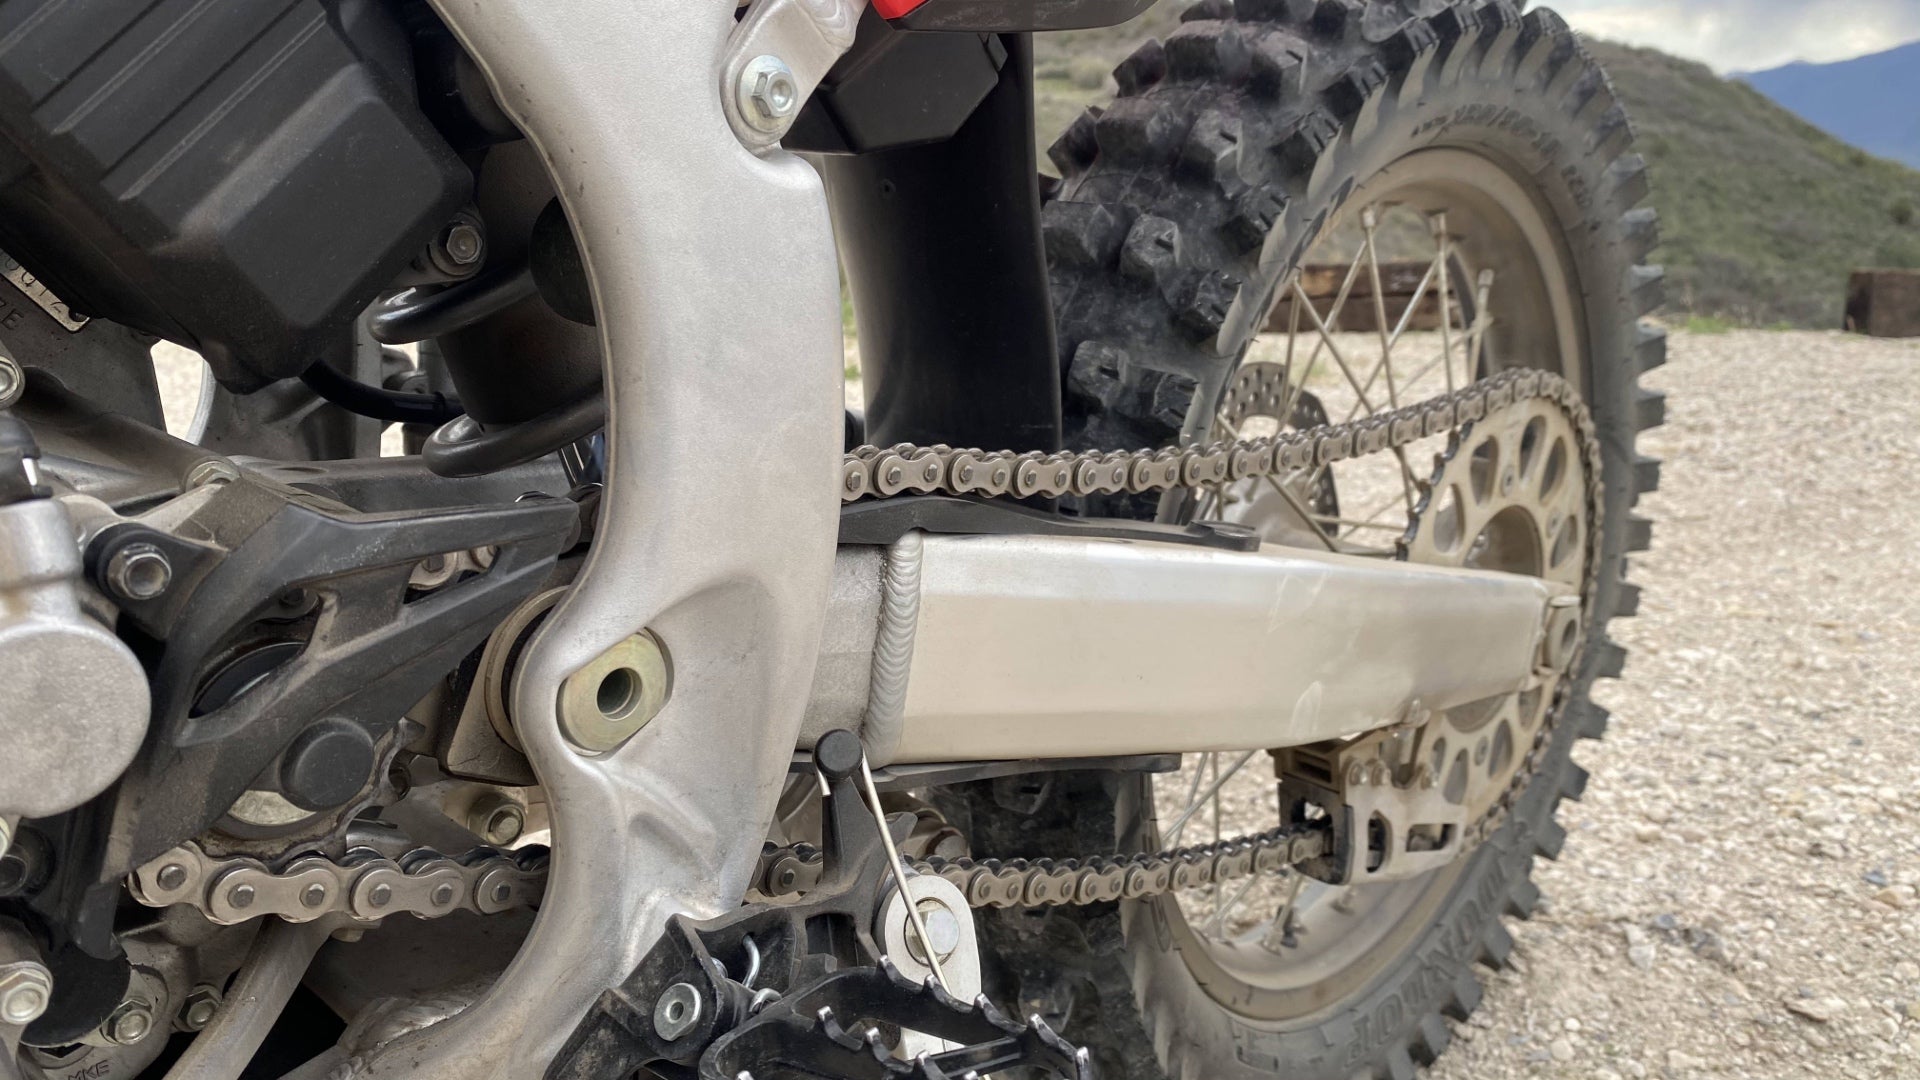 The countershaft sprocket connected to the rear sprocket via the chain. , <i>Jonathon Klein</i>